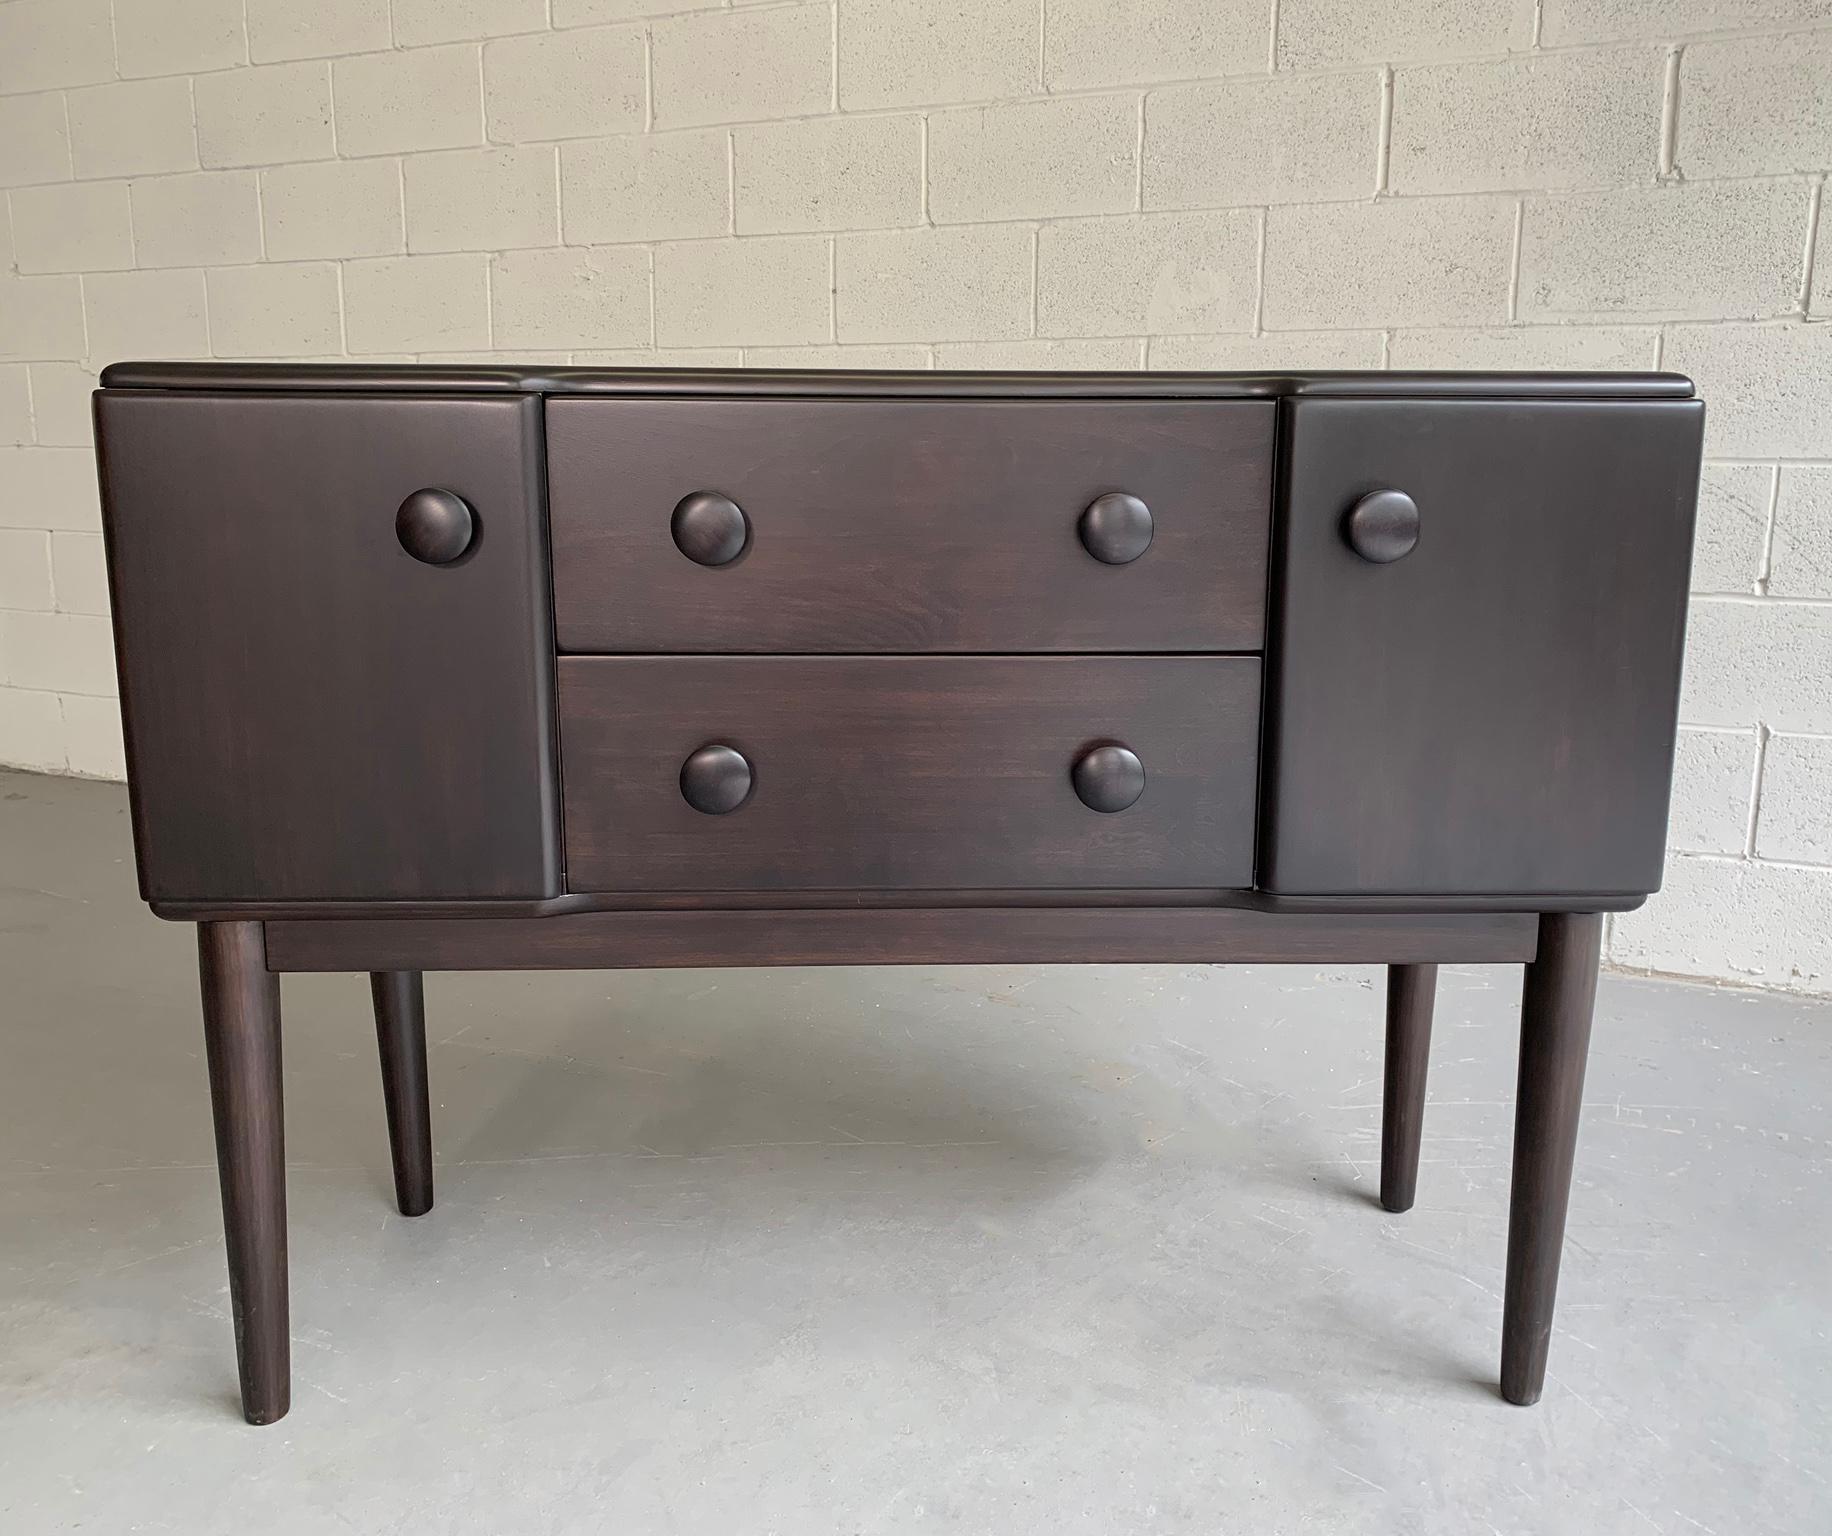 Mid-Century Modern, solid ebonized maple, sideboard, credenza or console by Heywood Wakefield features center drawers and side cabinets that measure 14.5 inches height with distinct round handles and tapered legs. The cabinet height itself is 19